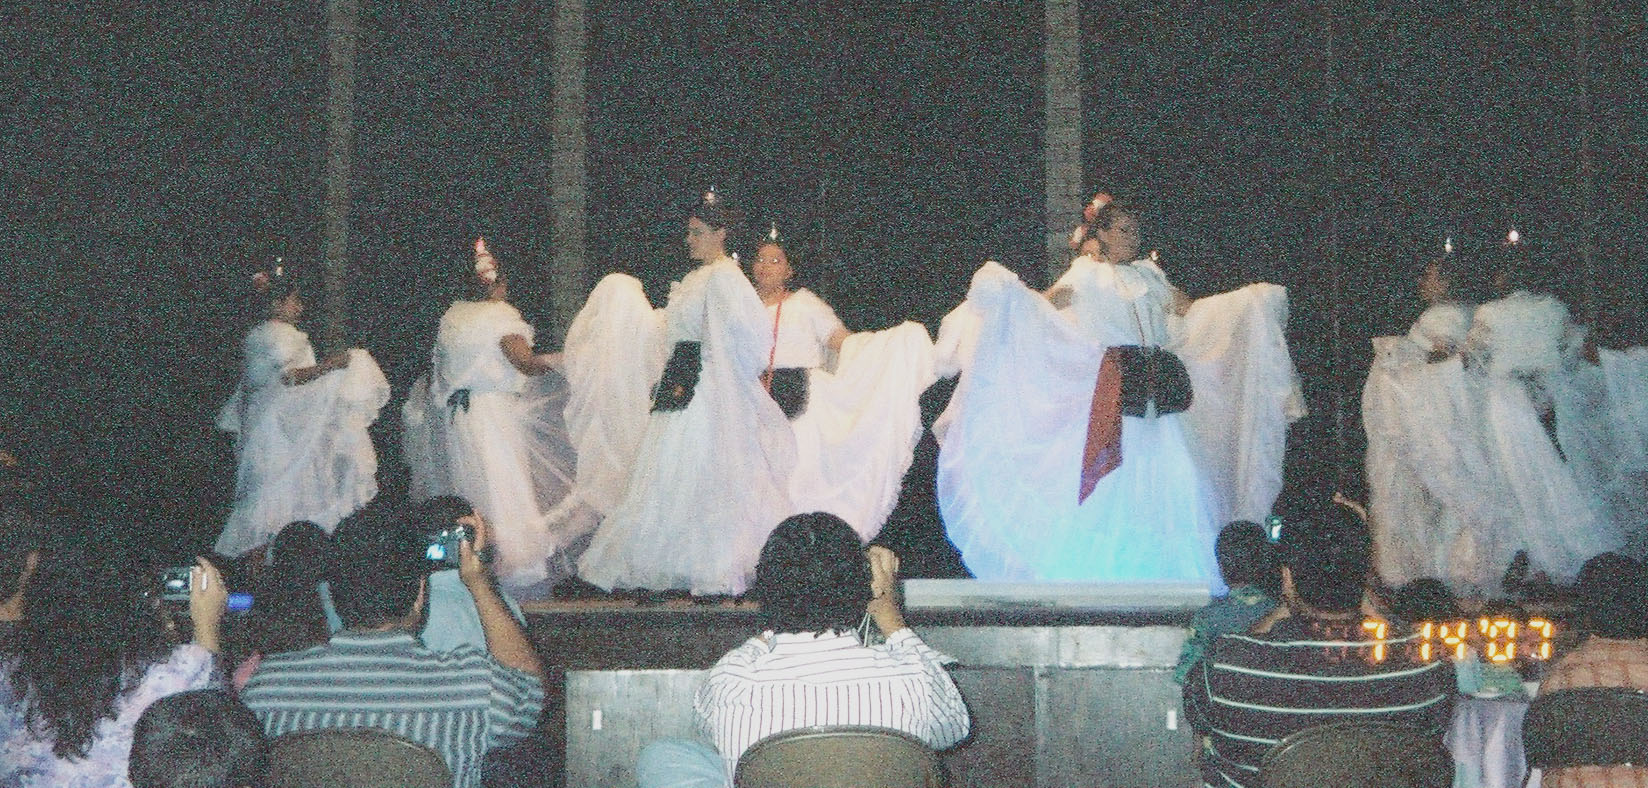 dancers in white dresses